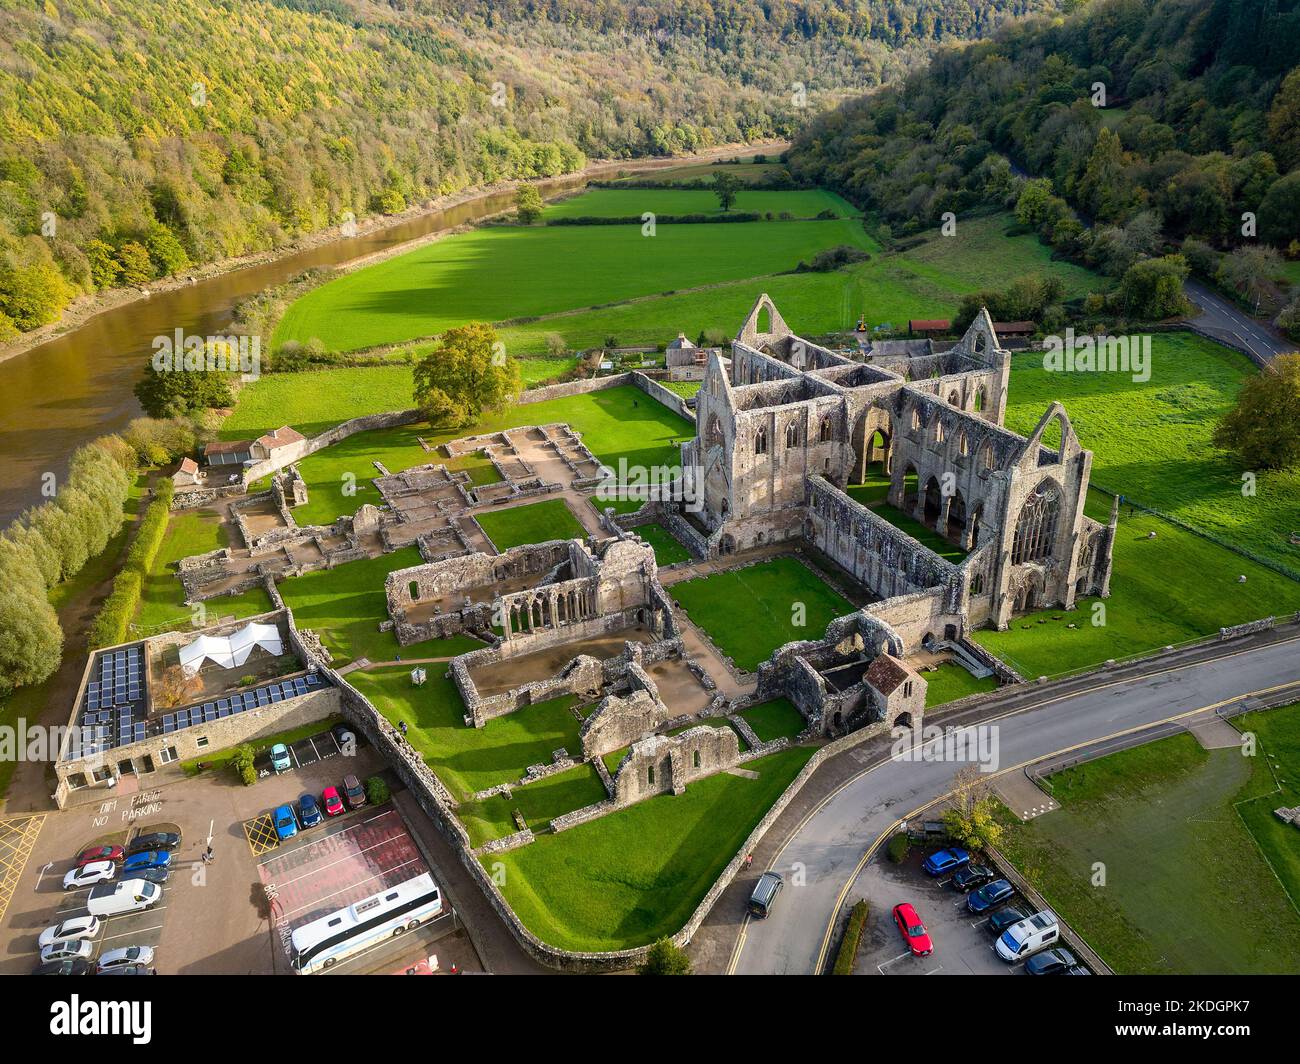 Aerial view of an ancient ruined cistercian monastery (Tintern Abbey, Wales. Built circa 12th century AD) Stock Photo